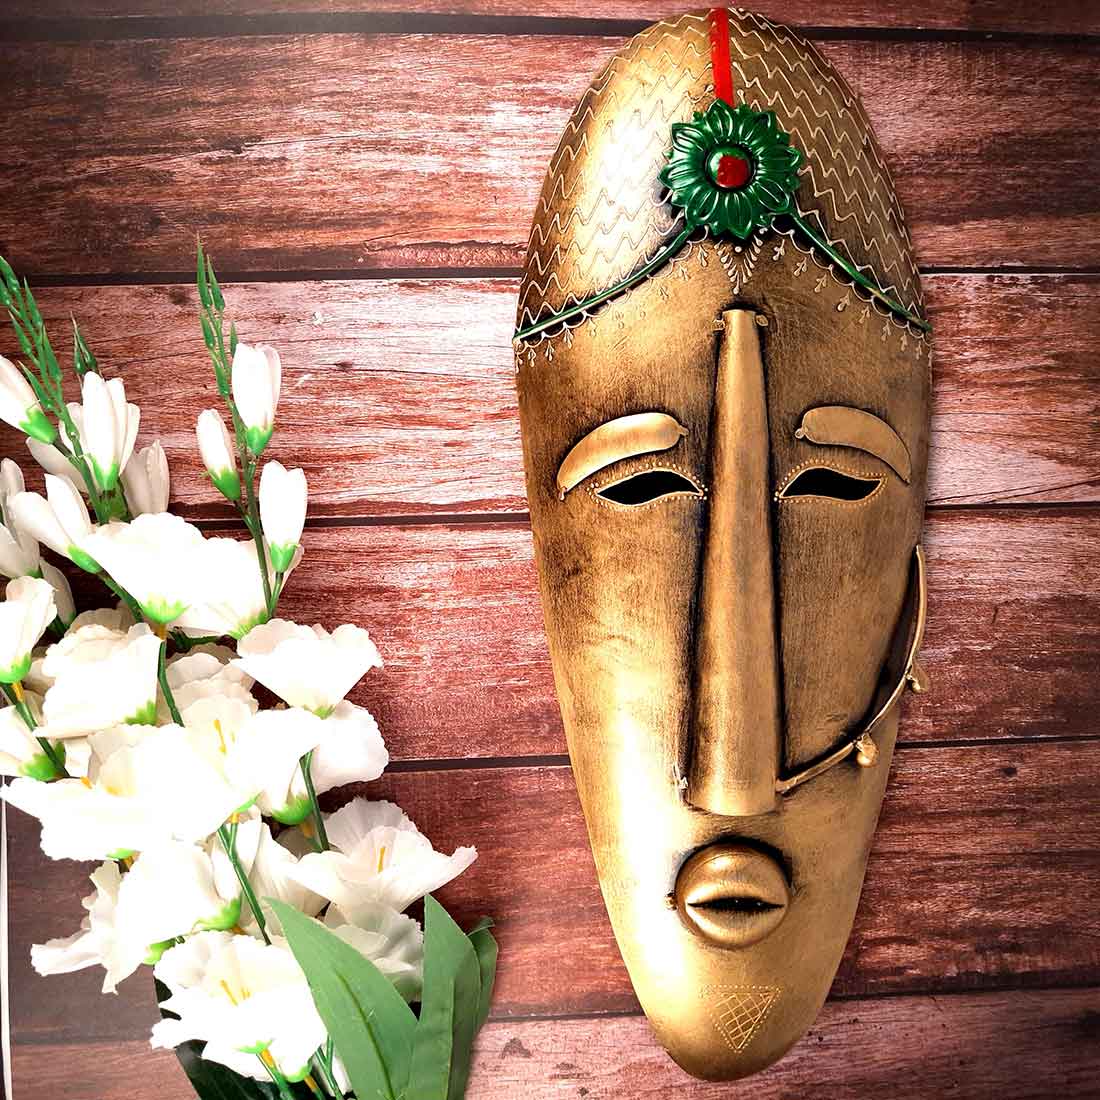 Tribal King Queen Mask Wall Hanging  - for Home | Office | Cafés Interior Décor - 21 Inch - ApkaMart